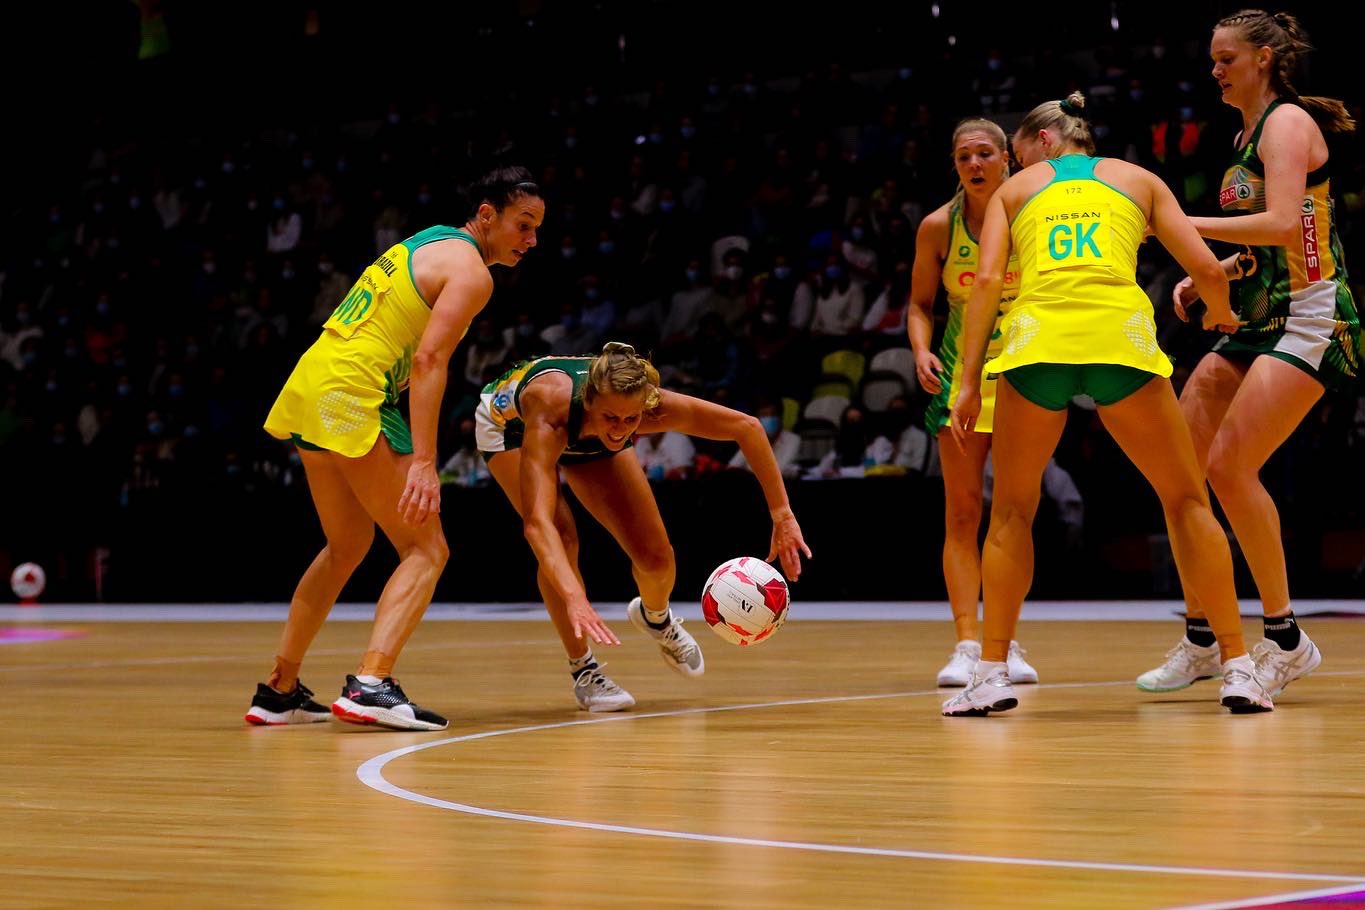 Izette Griesel keeps the ball out of Aussie hands. Image: Ben Lumley